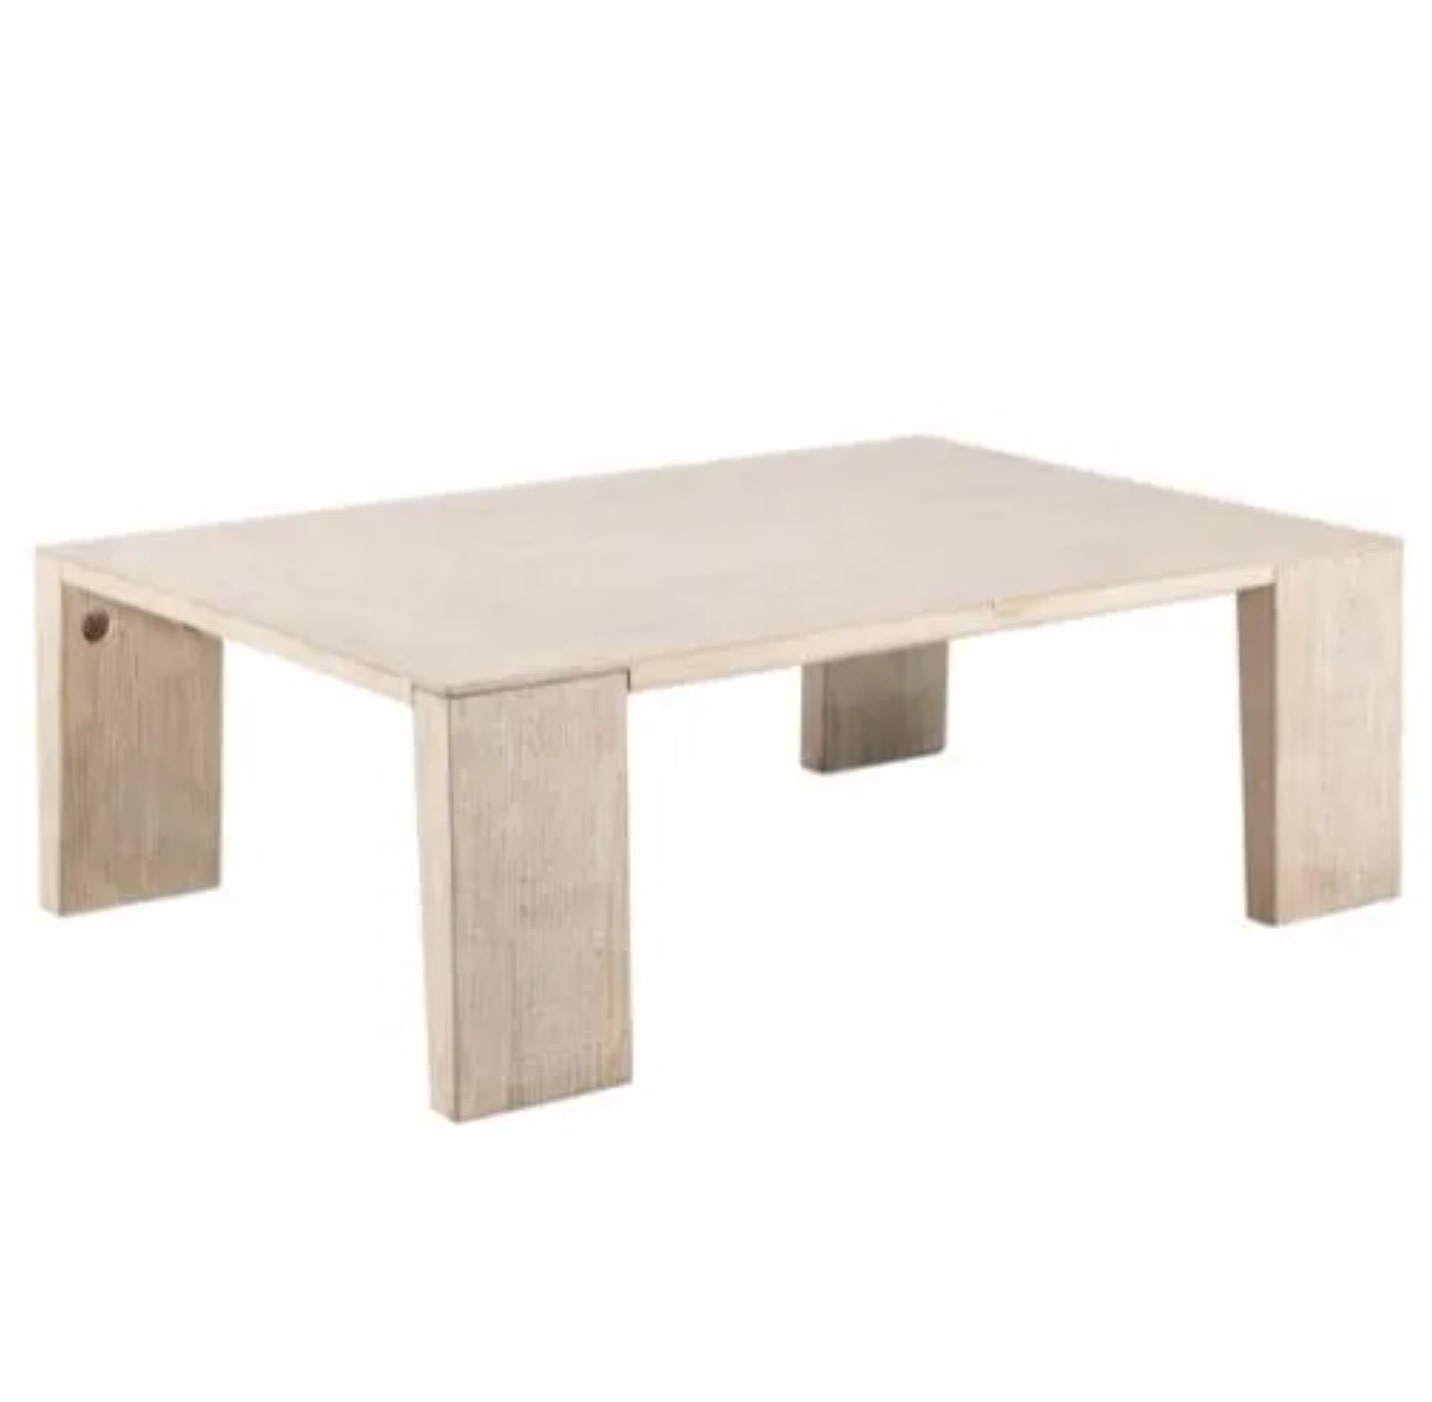 Oliver Coffee Table, White Washed 54 x 37 x 18 Furniture Available for Local Delivery or Pick Up